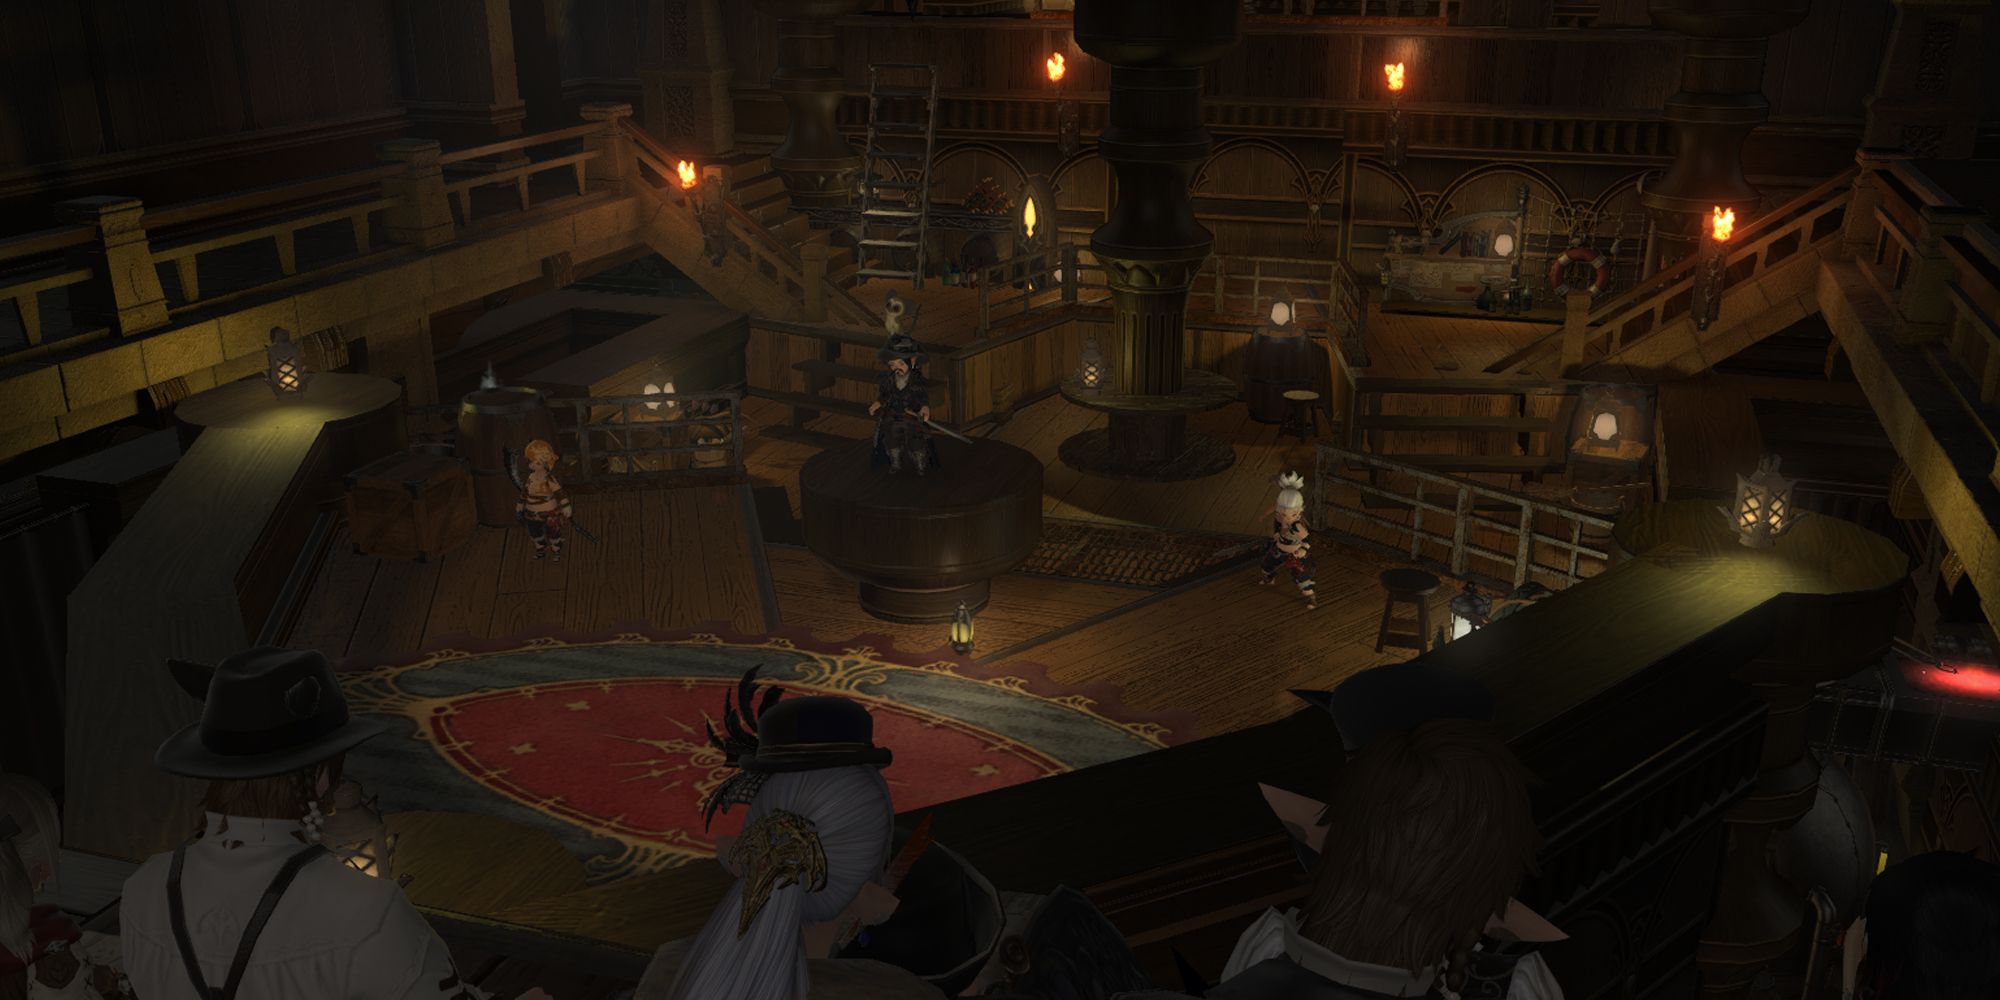 FF14 Namafel Inc performing  Lalafells of the Caribbean - Barbossa and crew on stage